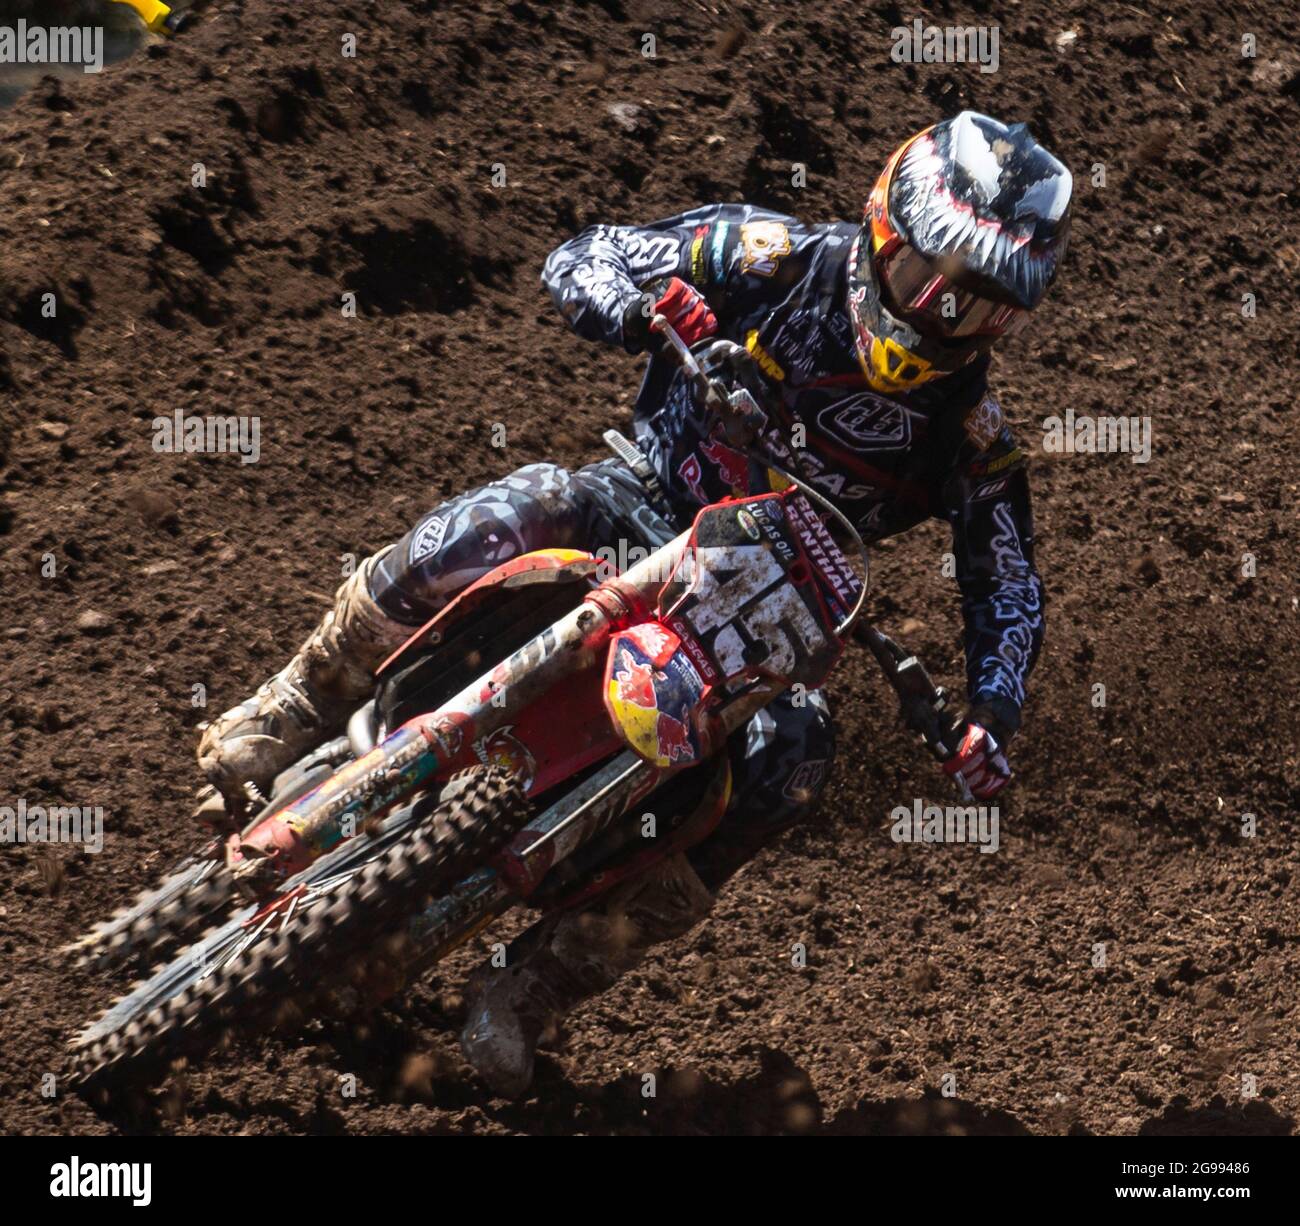 JUL 24 2021 Washougal, WA USA Troy Lee Designs/ Red Bull/ GASGAS Factory Racing Pierce Brown(45) coming out of turn 33 during the Lucas Oil Pro Motocross Washougal Championship 250 class moto # 1 at Washougal MX park Washougal, WA Thurman James/CSM Stock Photo